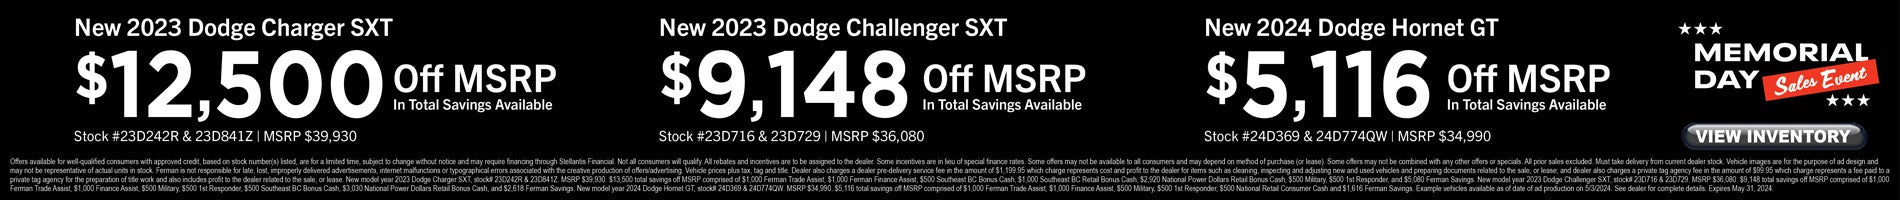 May Savings on New Charger, Challenger & Hornet